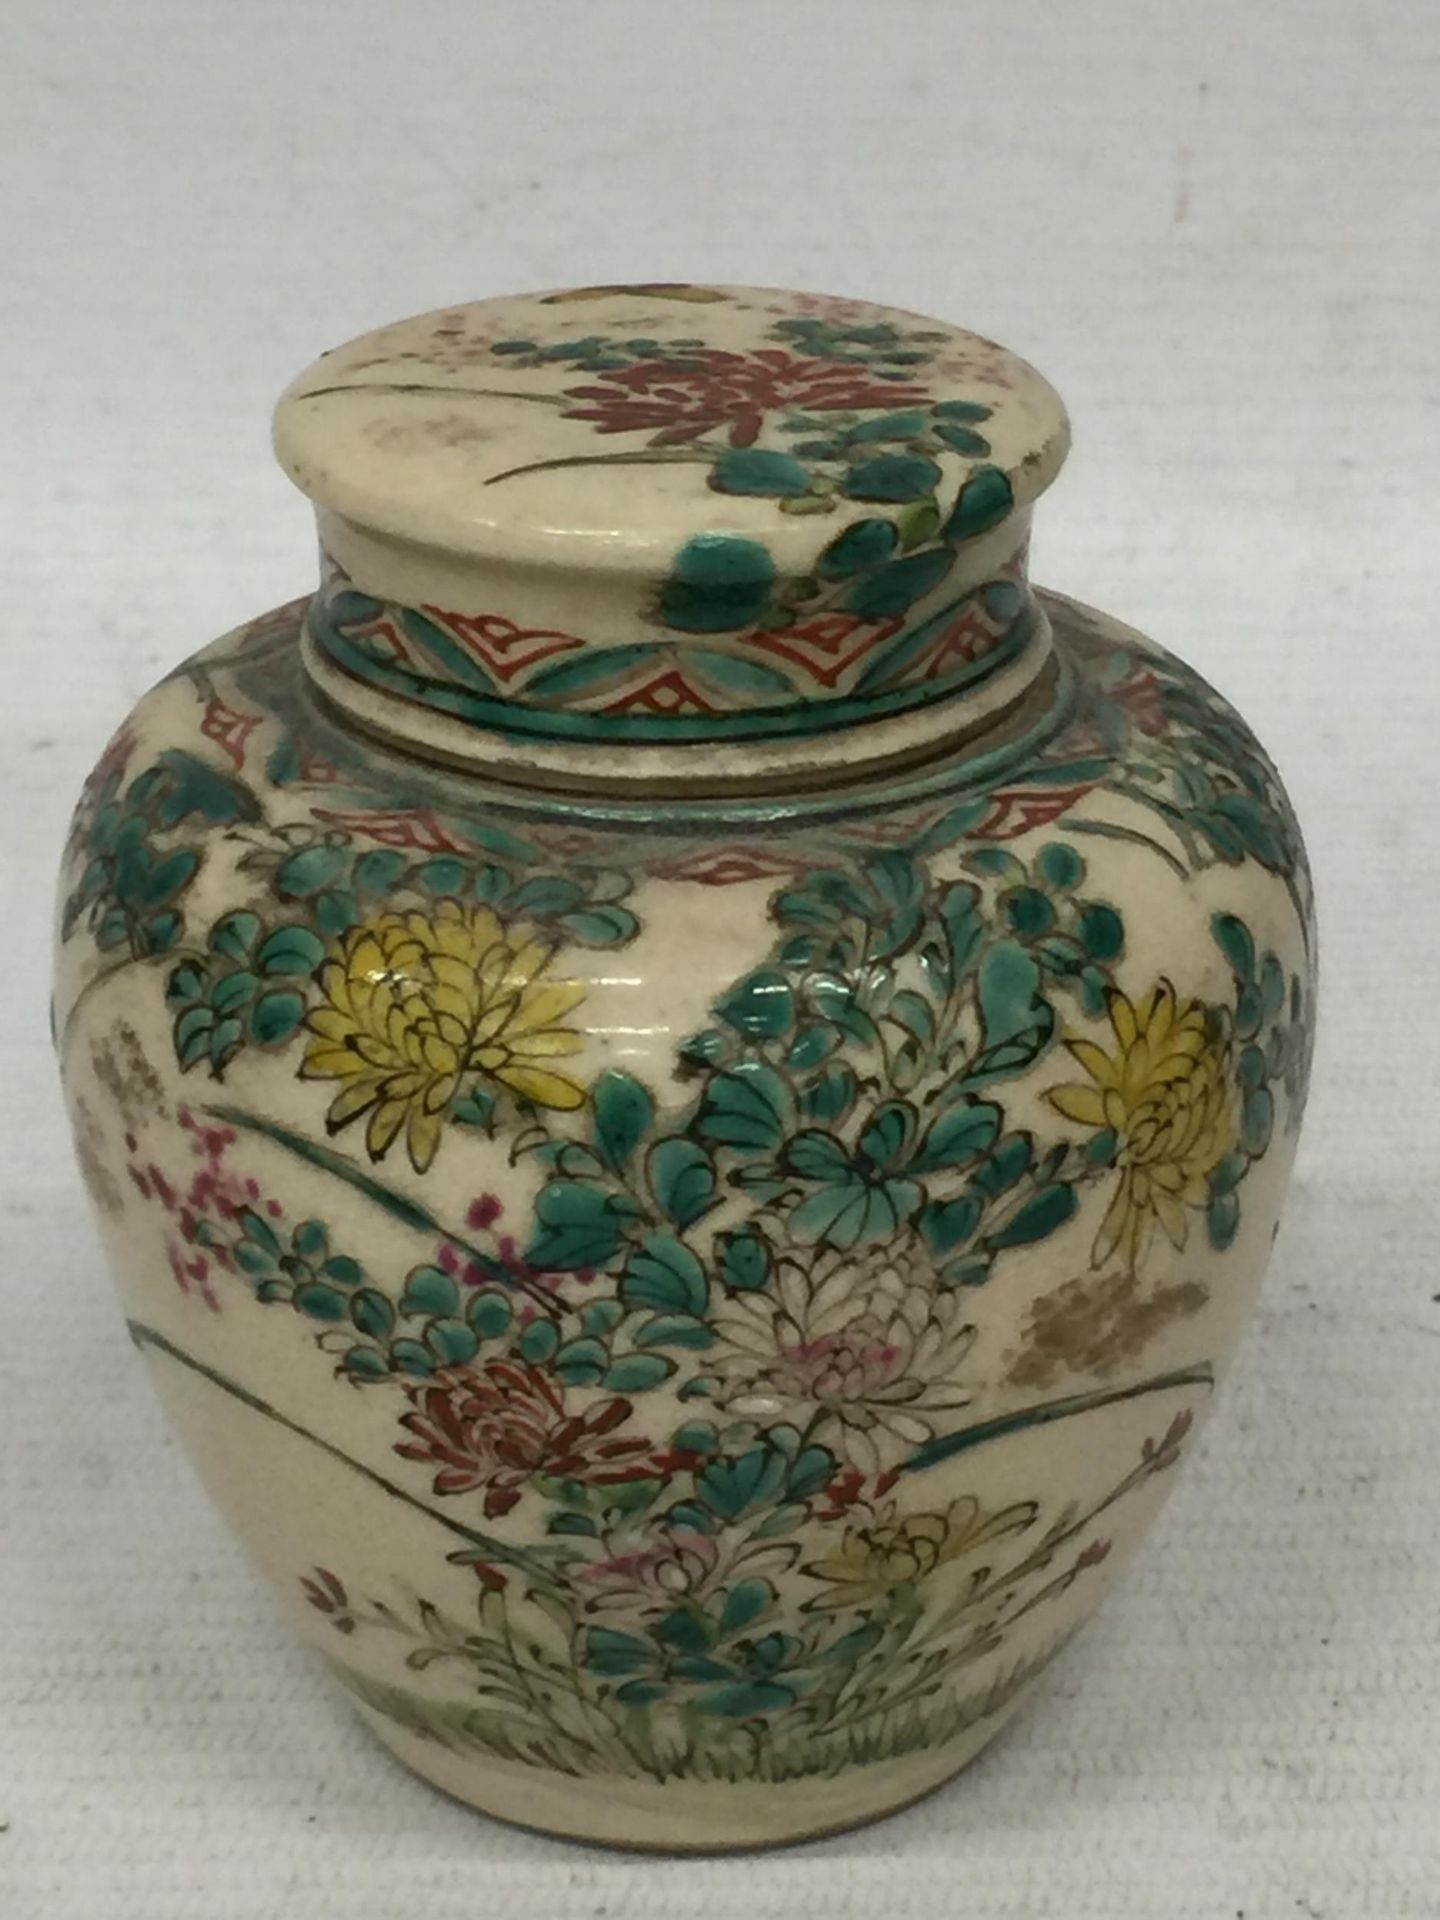 A JAPANESE STONEWARE LIDDED SMALL POT POURRI / GINGER JAR WITH BIRD AND FLORAL DESIGN AND INNDER LID - Image 3 of 7